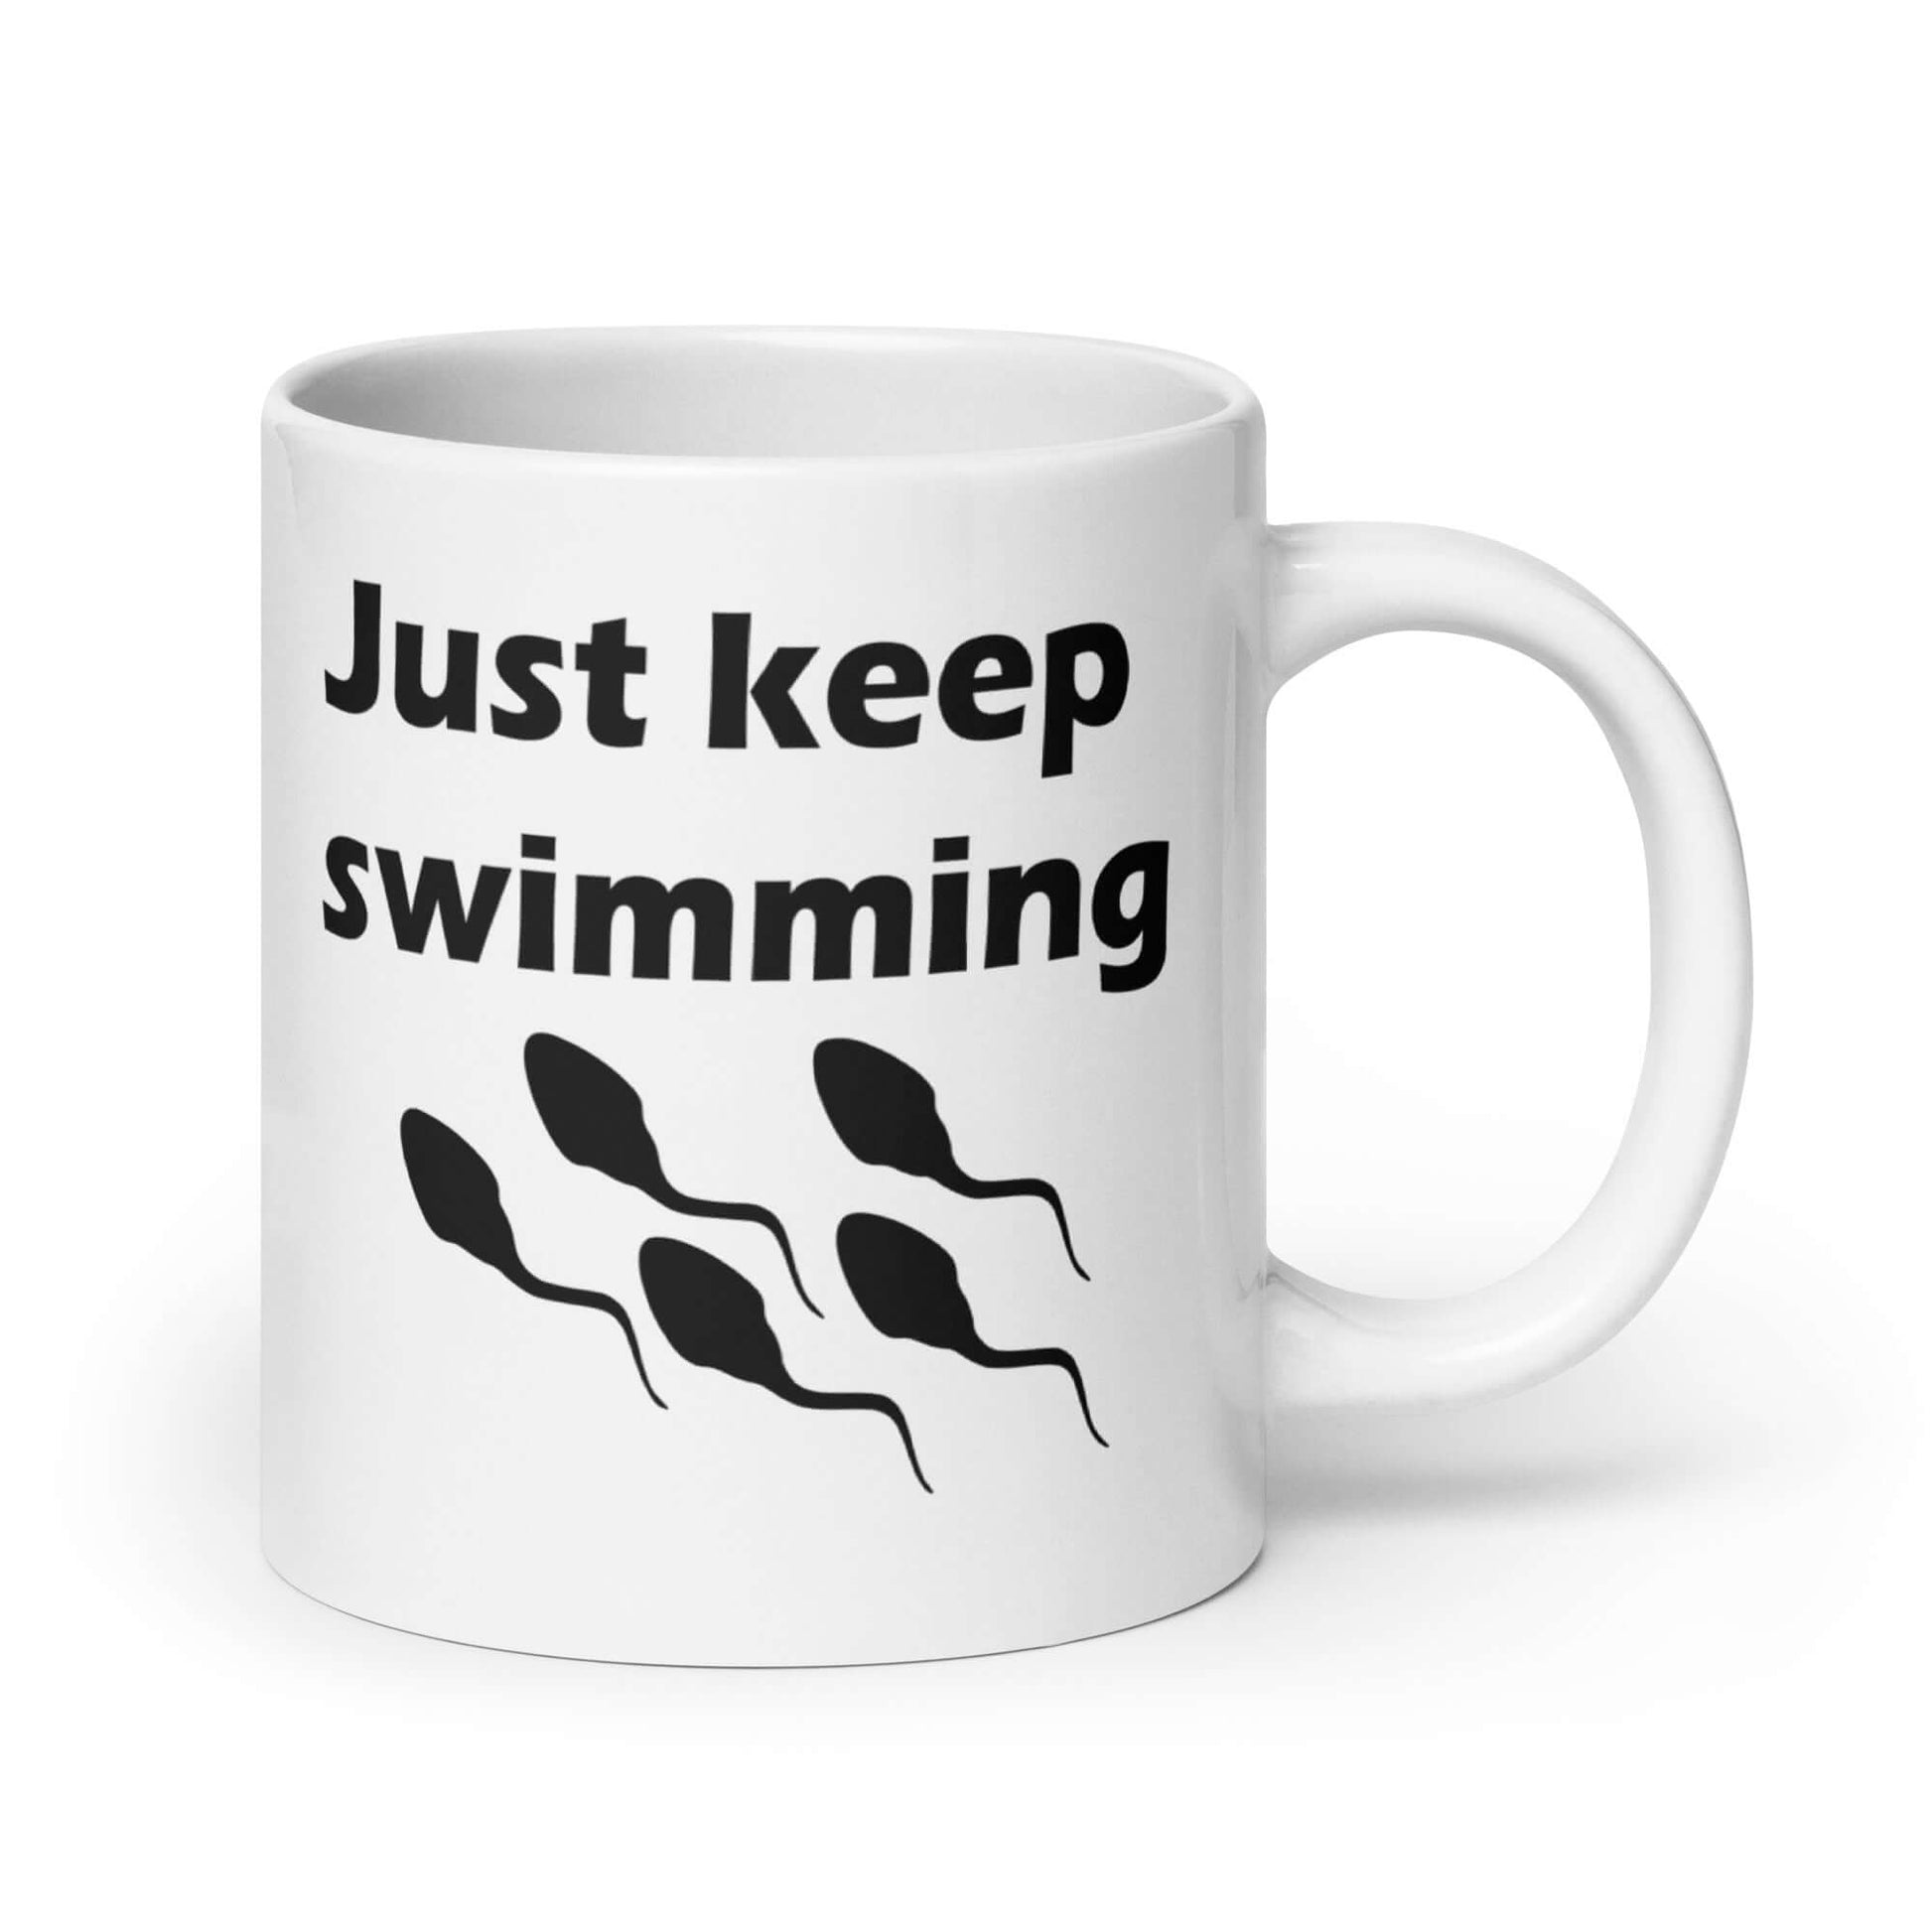 White ceramic coffee mug with the phrase Just keep swimming printed on both sides of the mug. There is an image of some swimming sperm underneath the words.